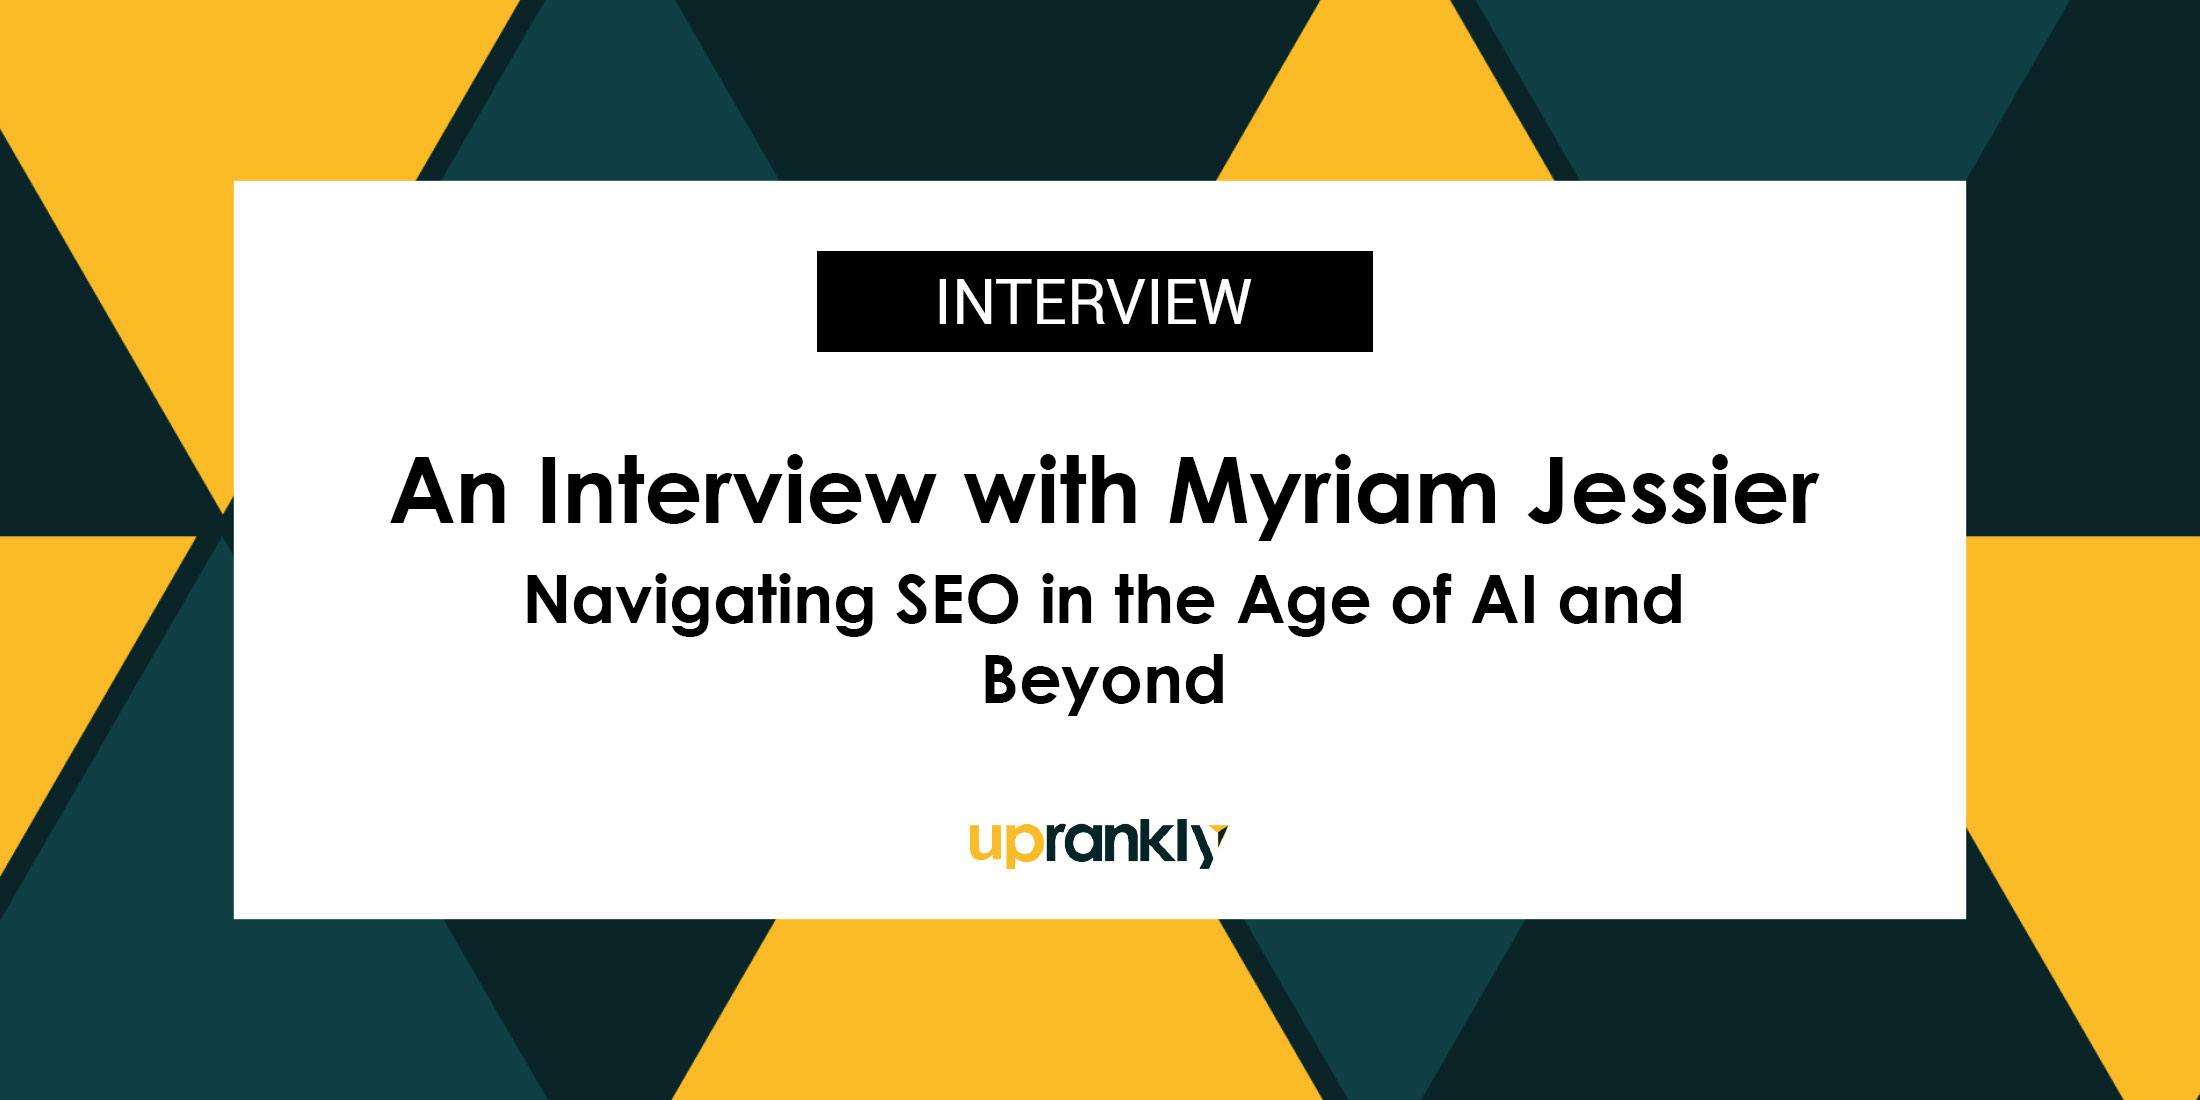 Interview With Myriam, Digital Strategist: Navigating SEO in the Age of AI and Beyond